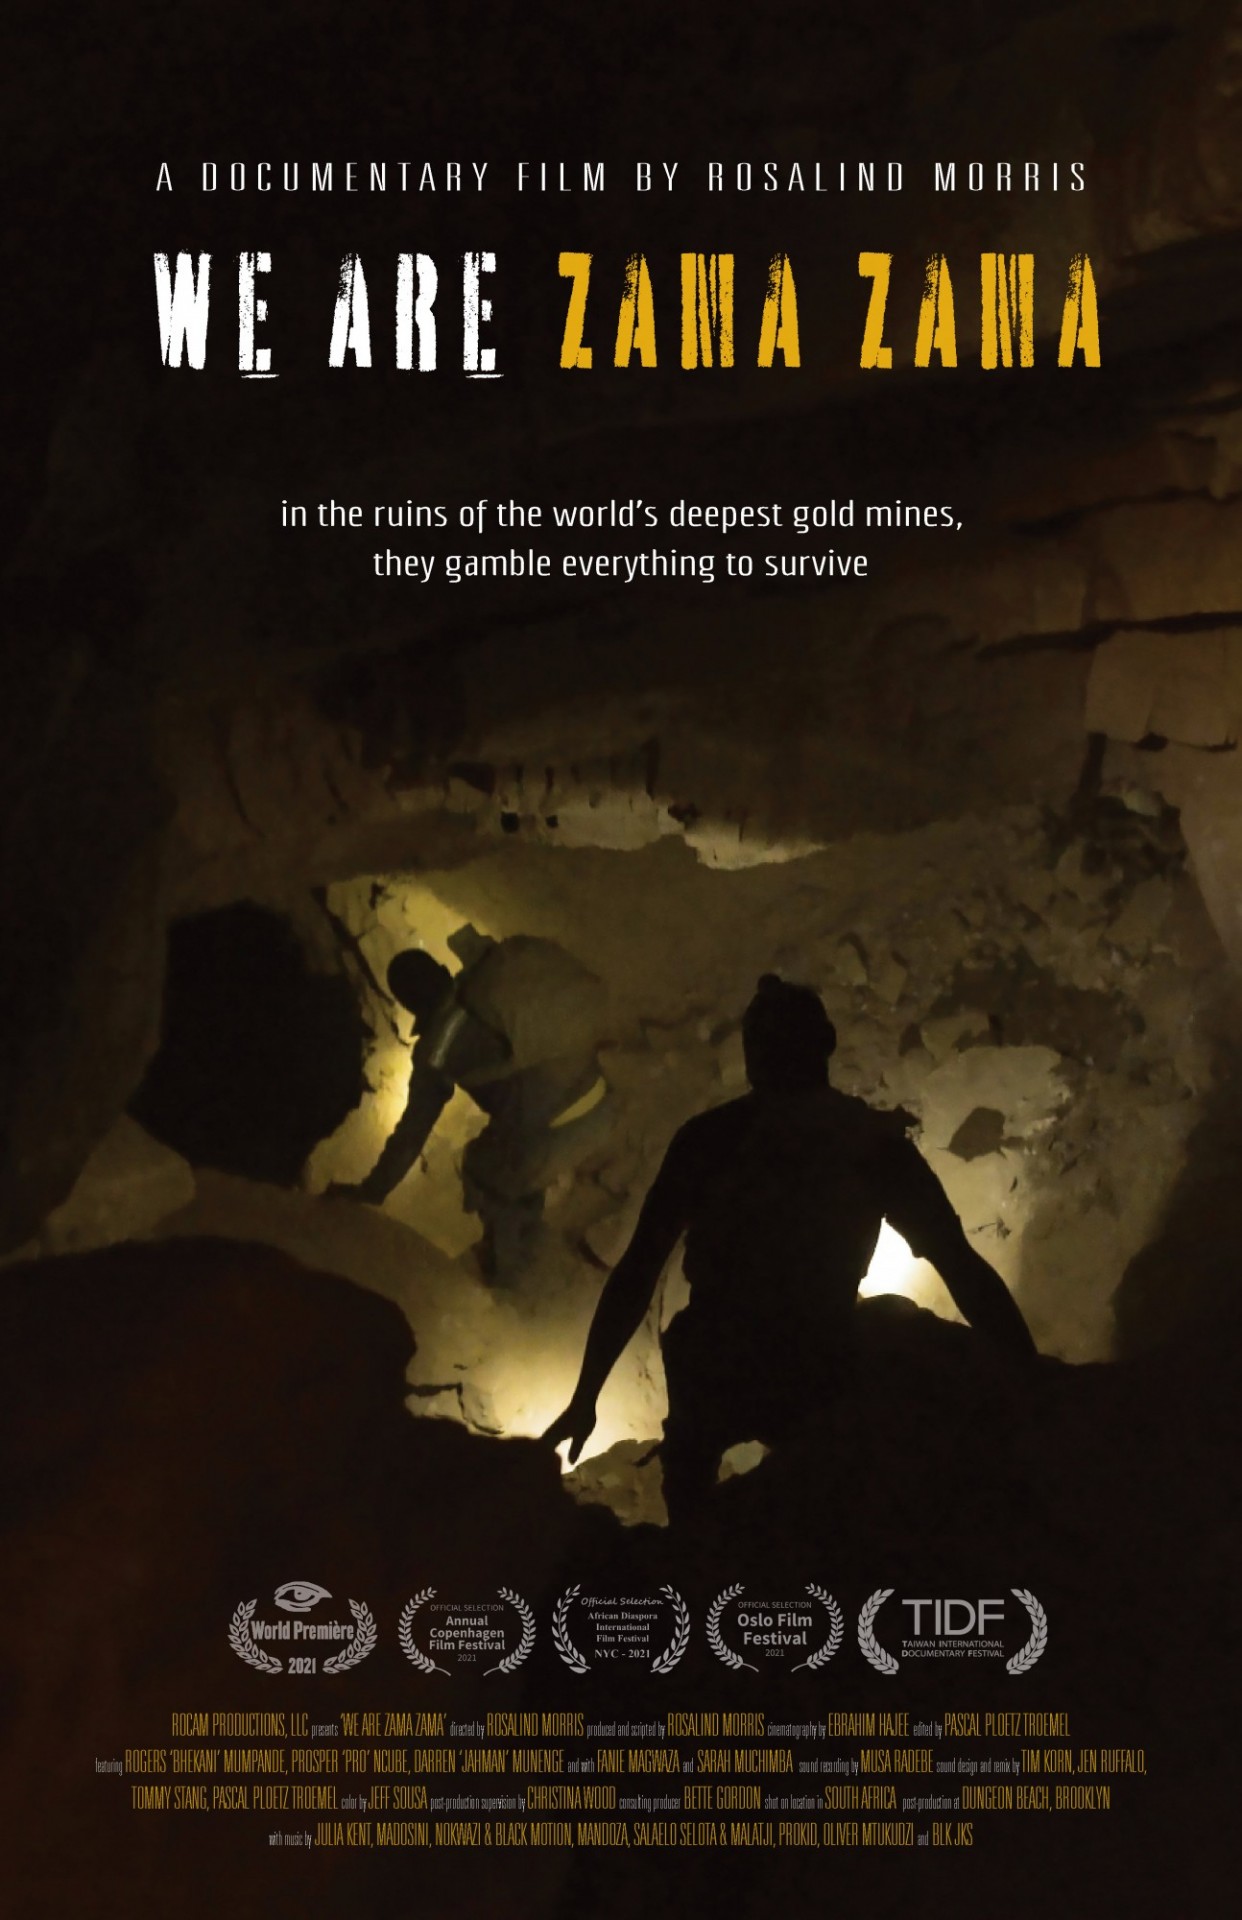 Official poster: We are Zama Zama, documentary film by Rosalind Morris